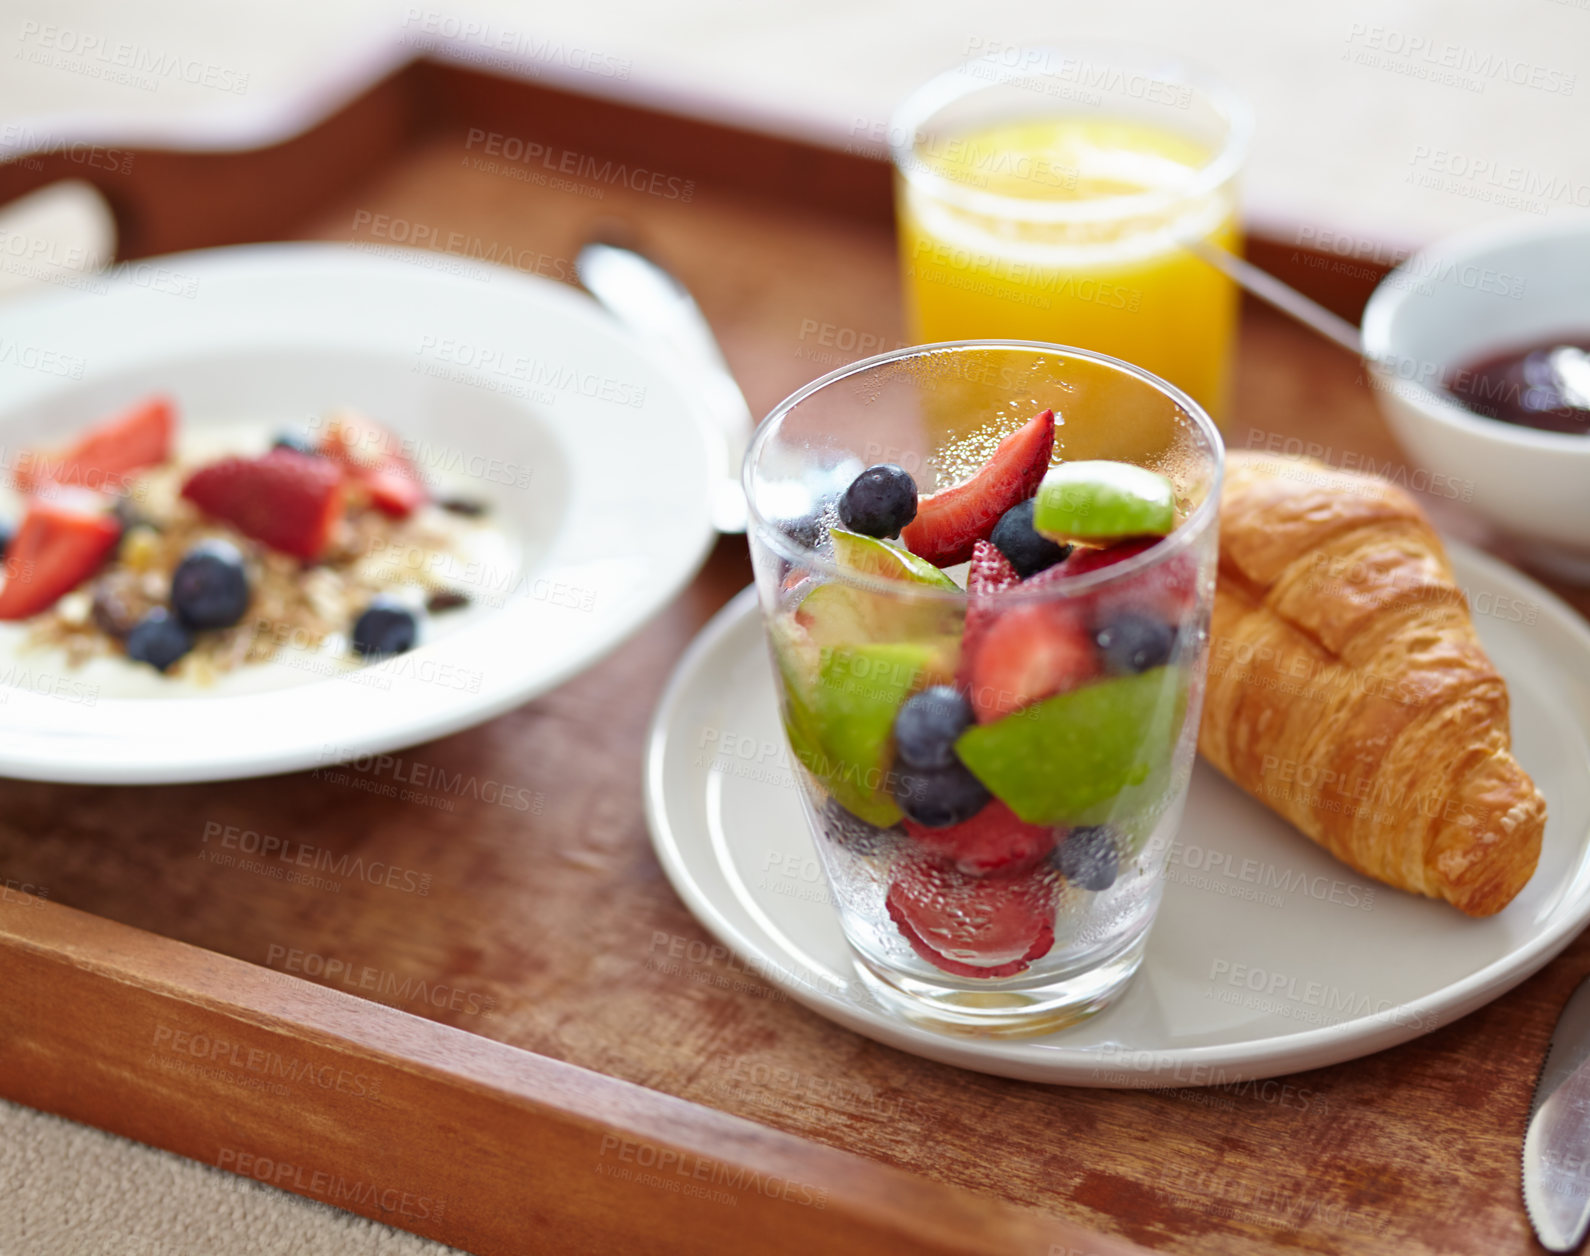 Buy stock photo Wellness, food and closeup of breakfast tray with muesli for balance, benefits or gut health. Fruit, zoom and croissant with vitamins for diet, nutrition or healthy eating, brunch or superfoods salad